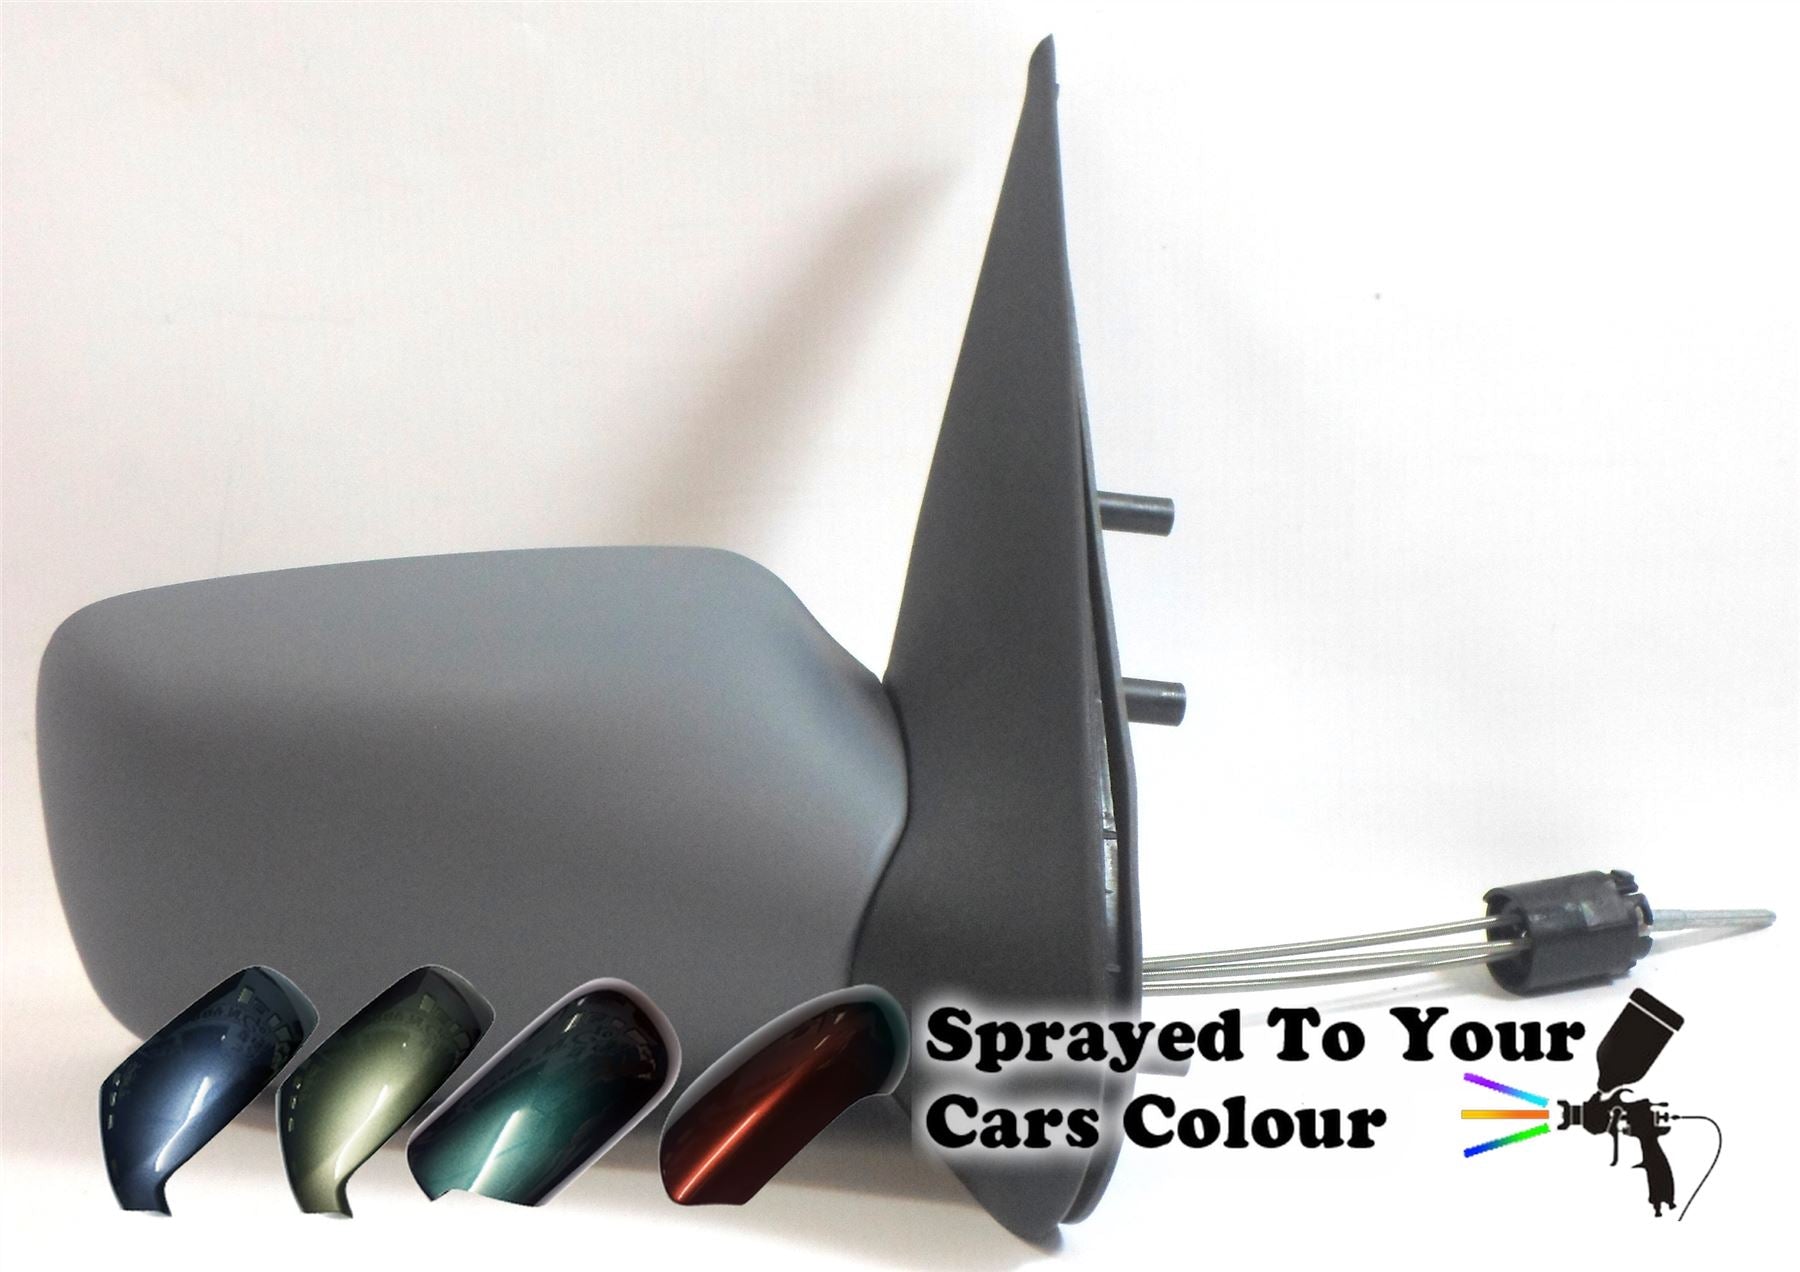 Ford Fiesta Mk5 1999-2002 Manual Cable Wing Door Mirror Drivers Side O/S Painted Sprayed